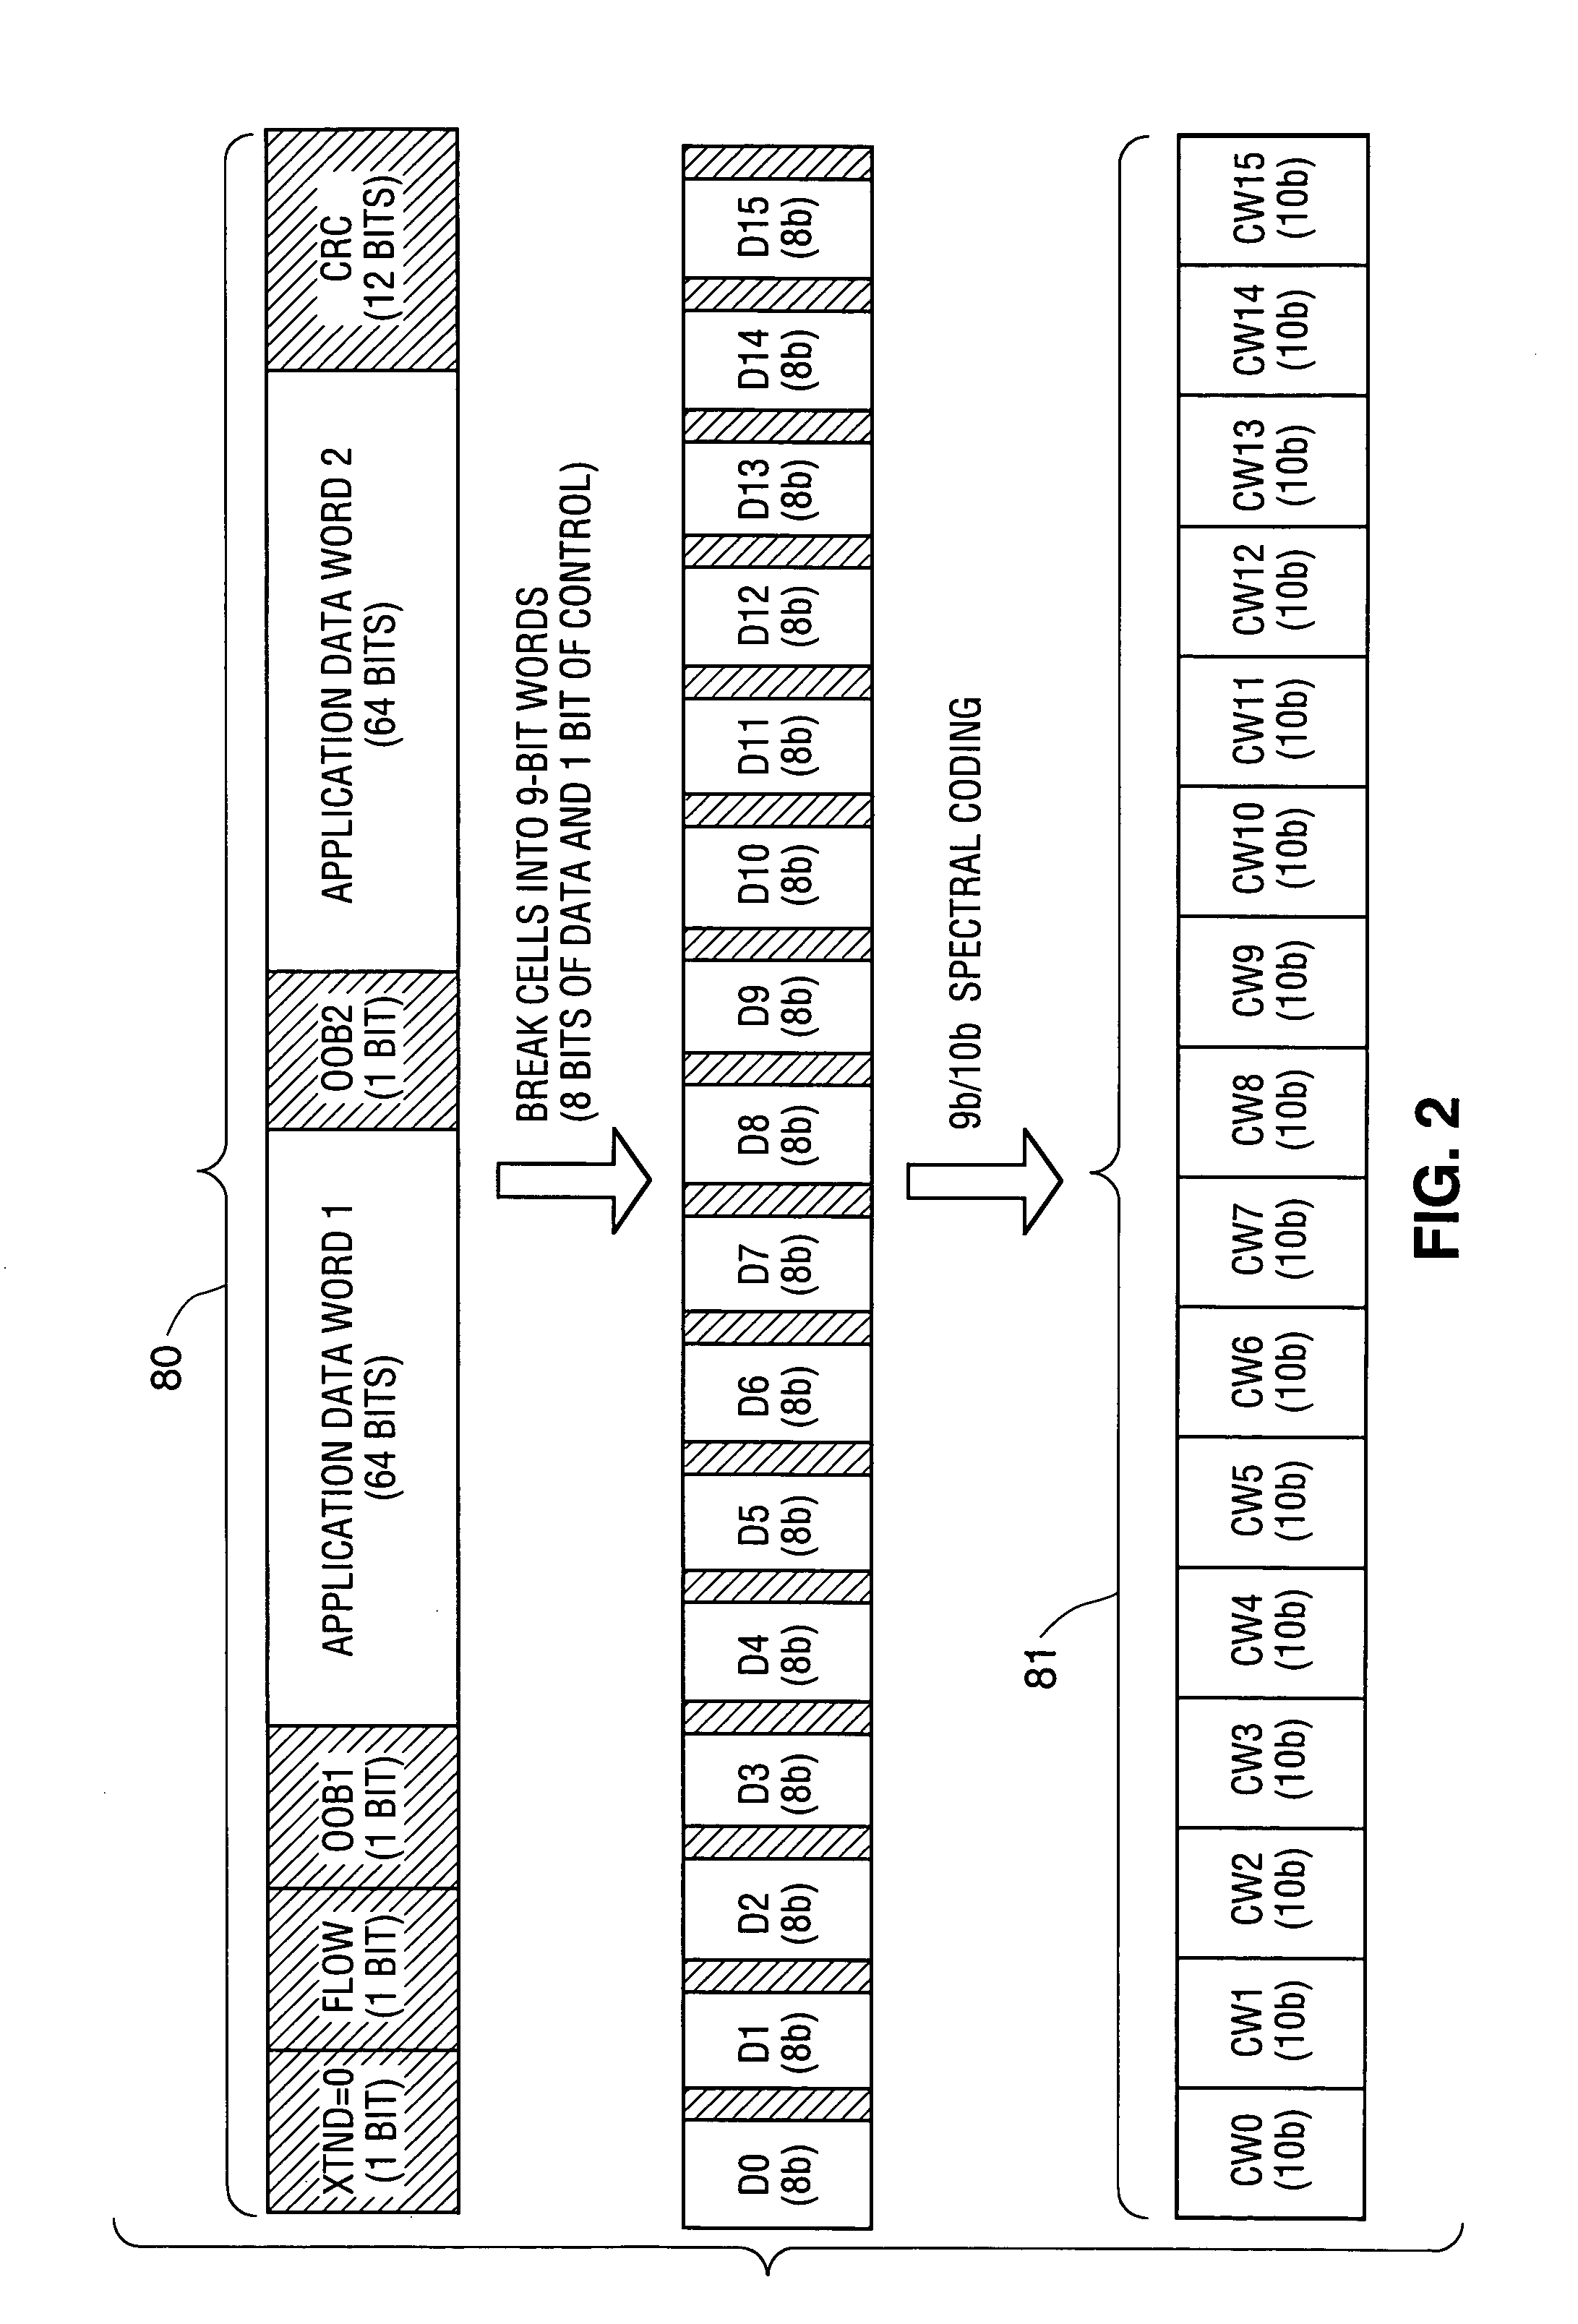 Method and system for encapsulation of multiple levels of communication protocol functionality within line codes